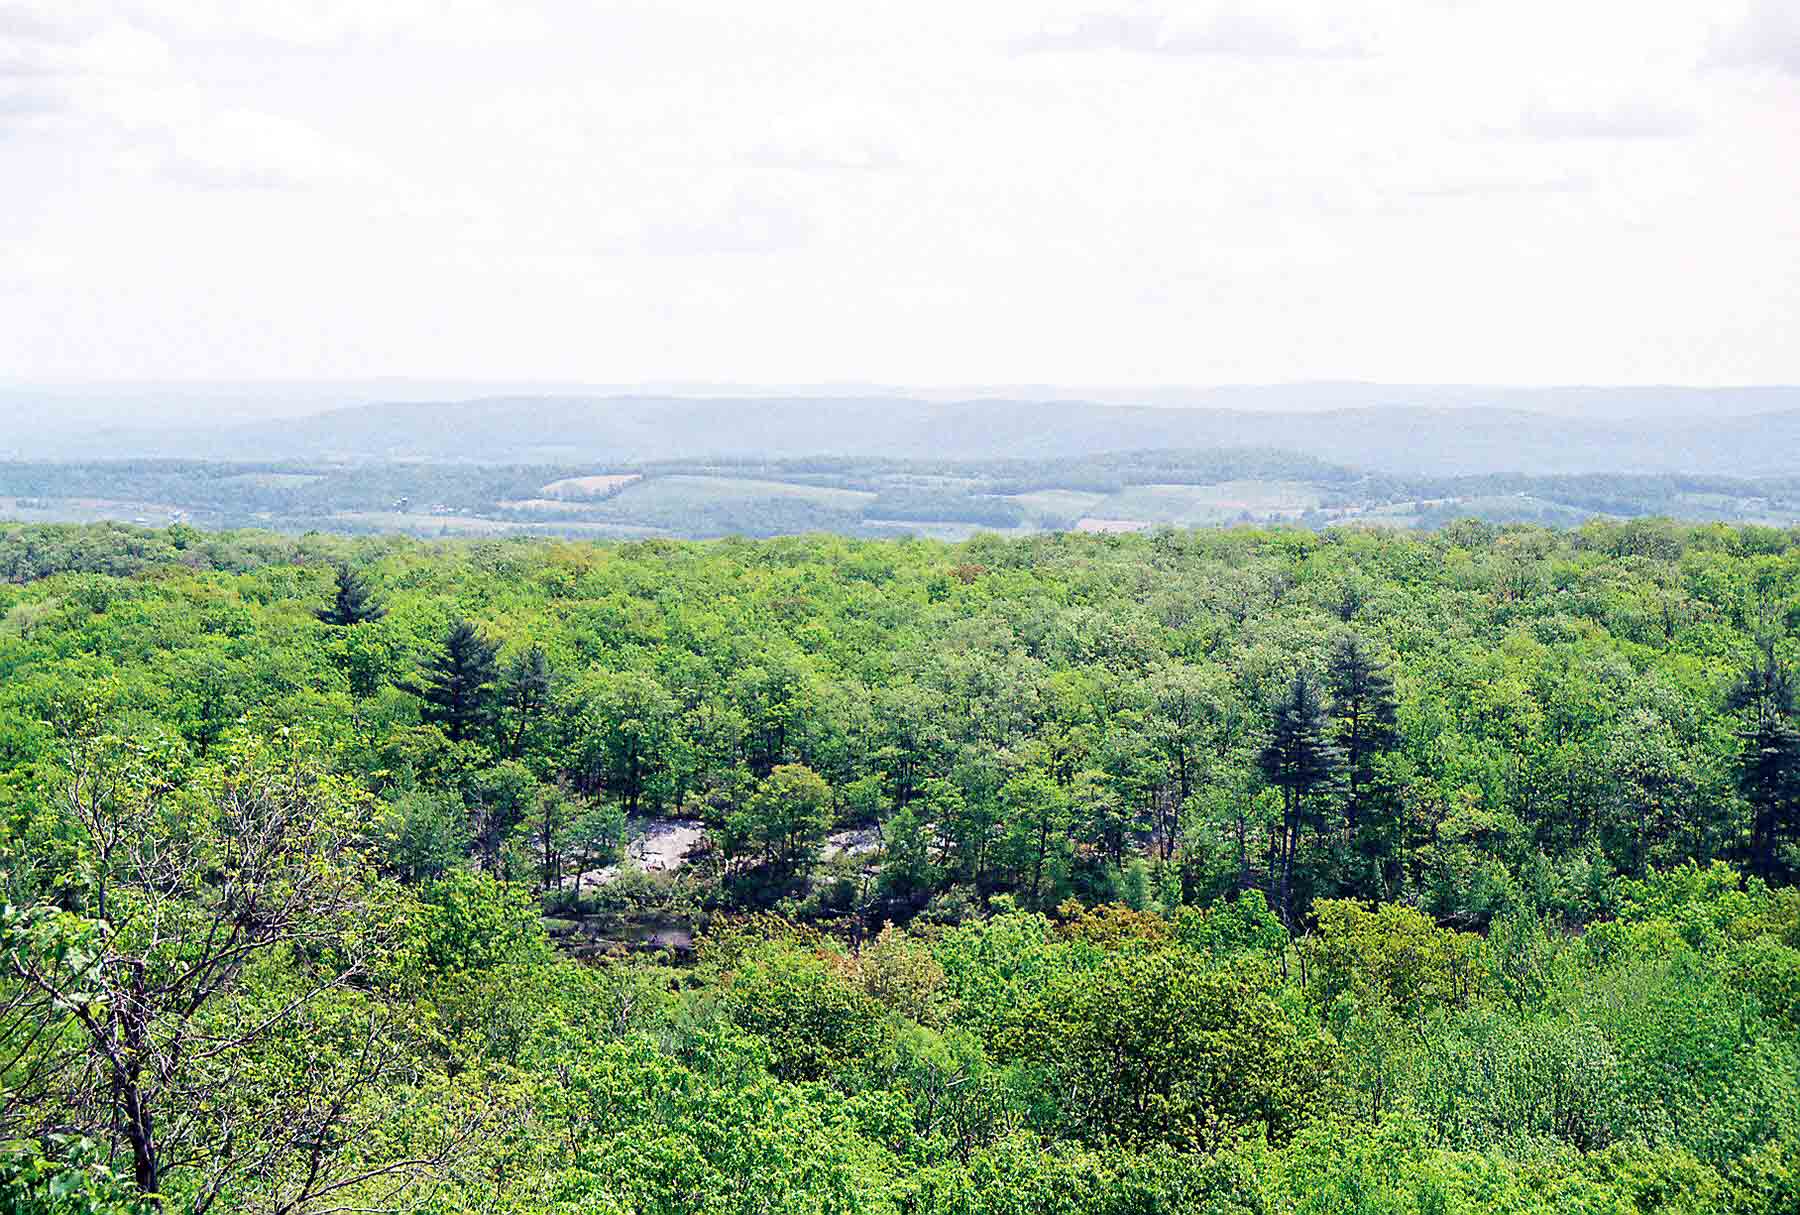 mm 1.4 - Looking east from the AT south of NJ 23 in High Point State Park. Two ranges of mountains can be seen in the distance, the nearer is Pochuk Mountain, the further is Wayanda Mt. The AT crosses both of these. Courtesy dlcul@conncoll.edu